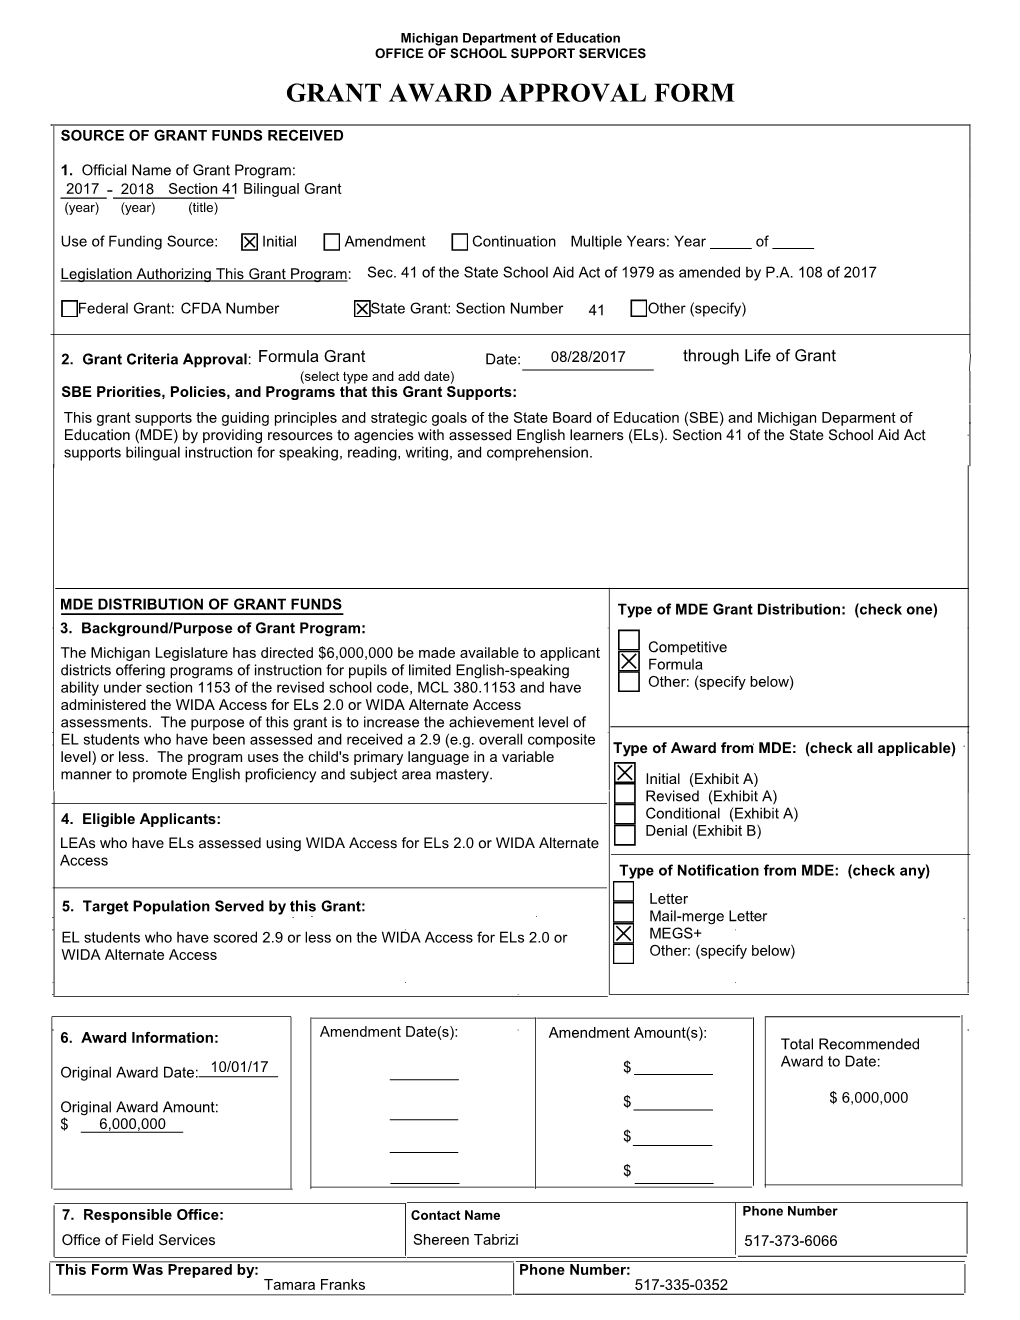 Grant Award Approval Form